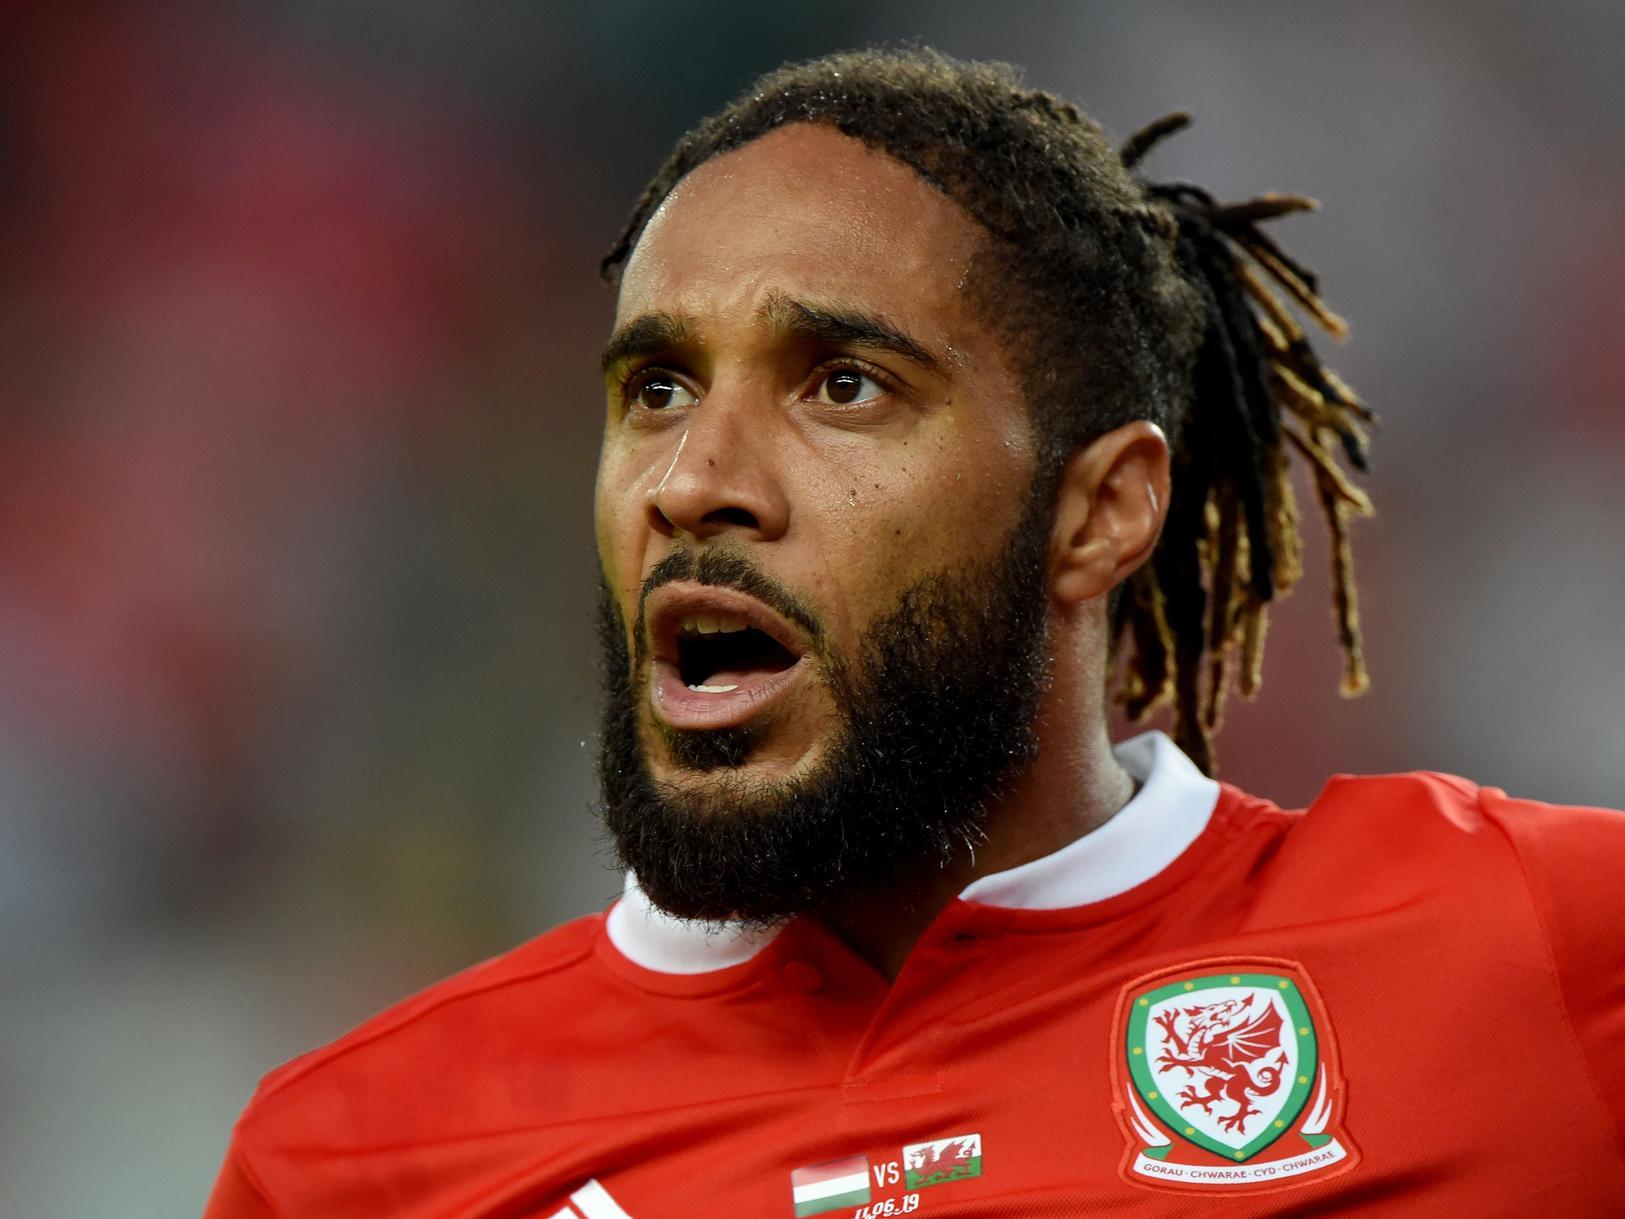 Wales international Ashley Williams has extended his contract with Bristol City until the end of the current campaign, after a strong start to the 2019/20 campaign. (Bristol Post)